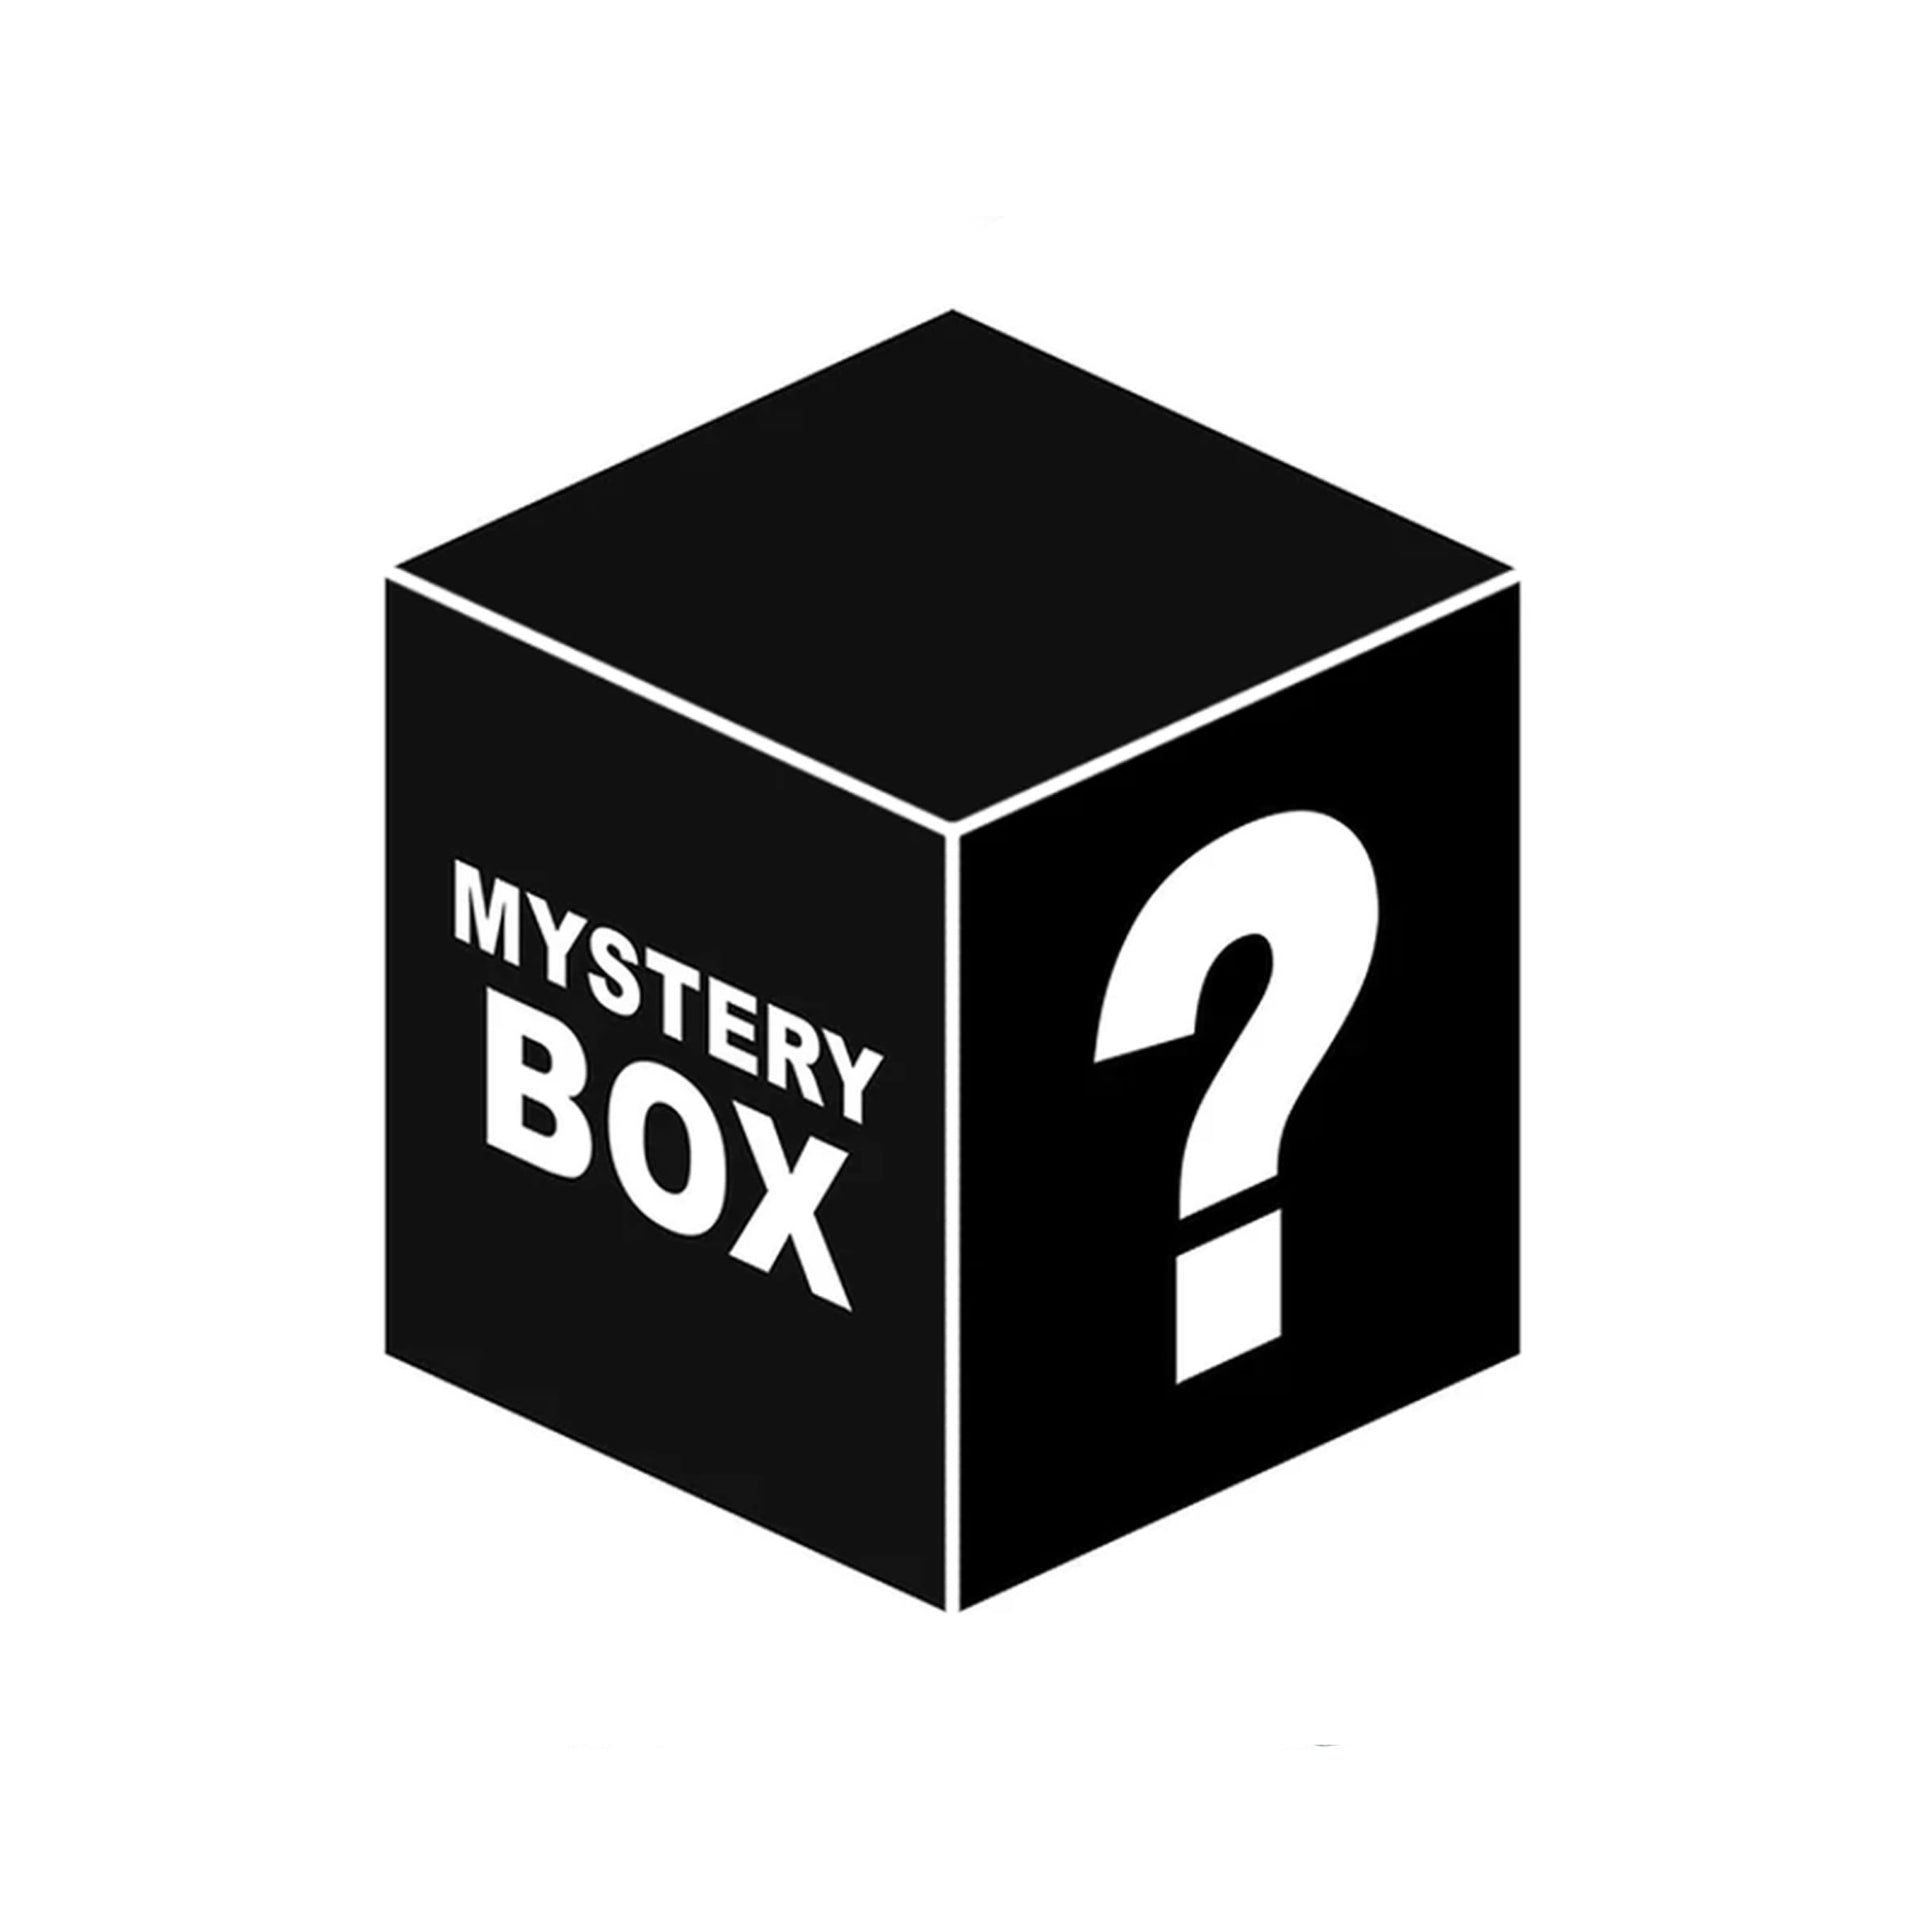 The Mysterious Box of Mystery: Surprise curated selection of Vat19 goodies.